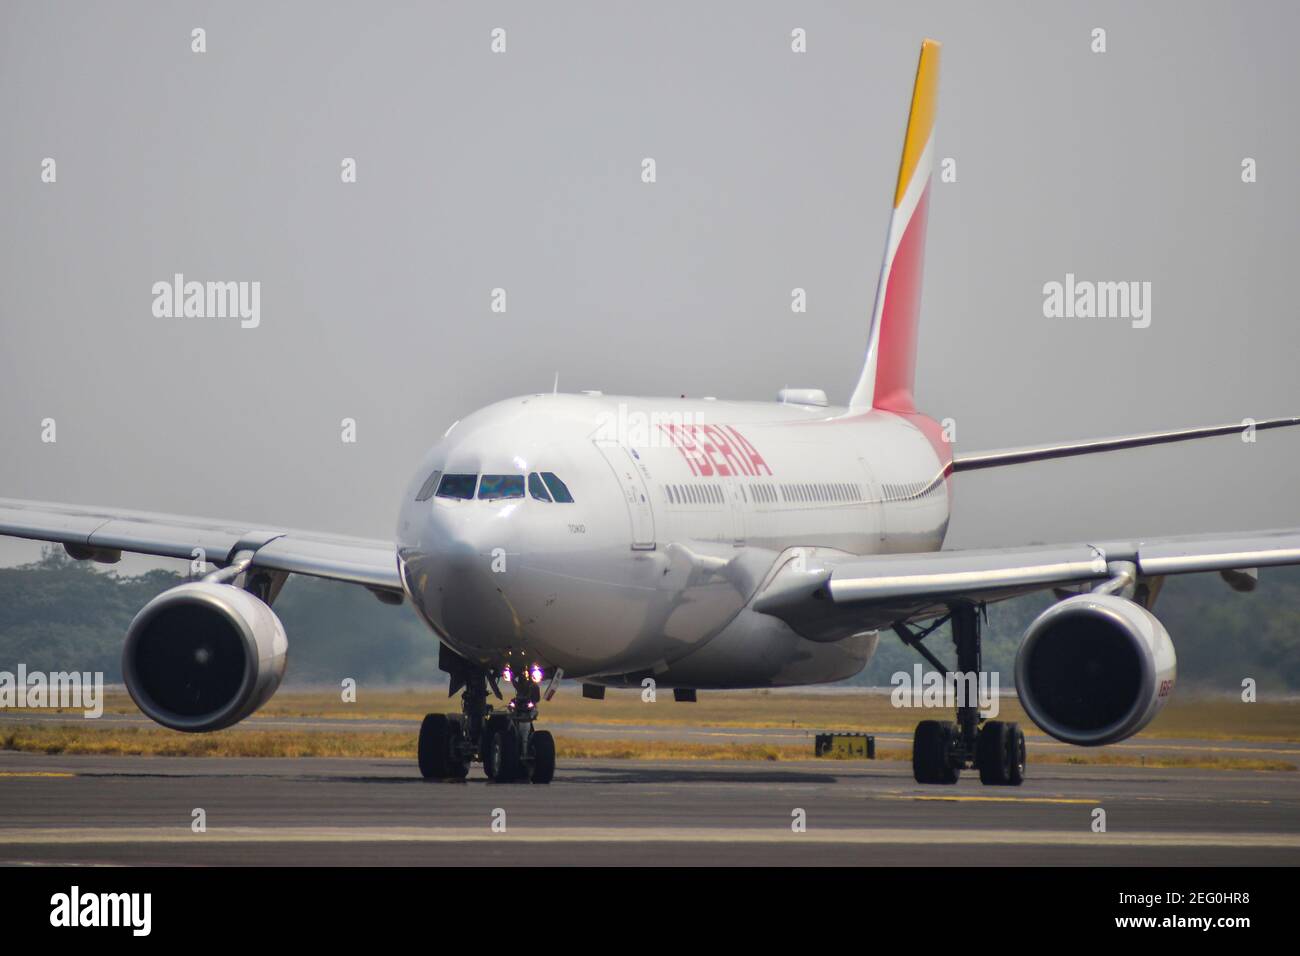 San Salvador, El Salvador. 17th Feb, 2021. An IBERIA airlines flight brought into the central American country cargo containing doses of the AstraZeneca COVID-19 vaccine.The government announced health workers will be the first to receive the vaccine. Credit: Camilo Freedman/ZUMA Wire/Alamy Live News Stock Photo